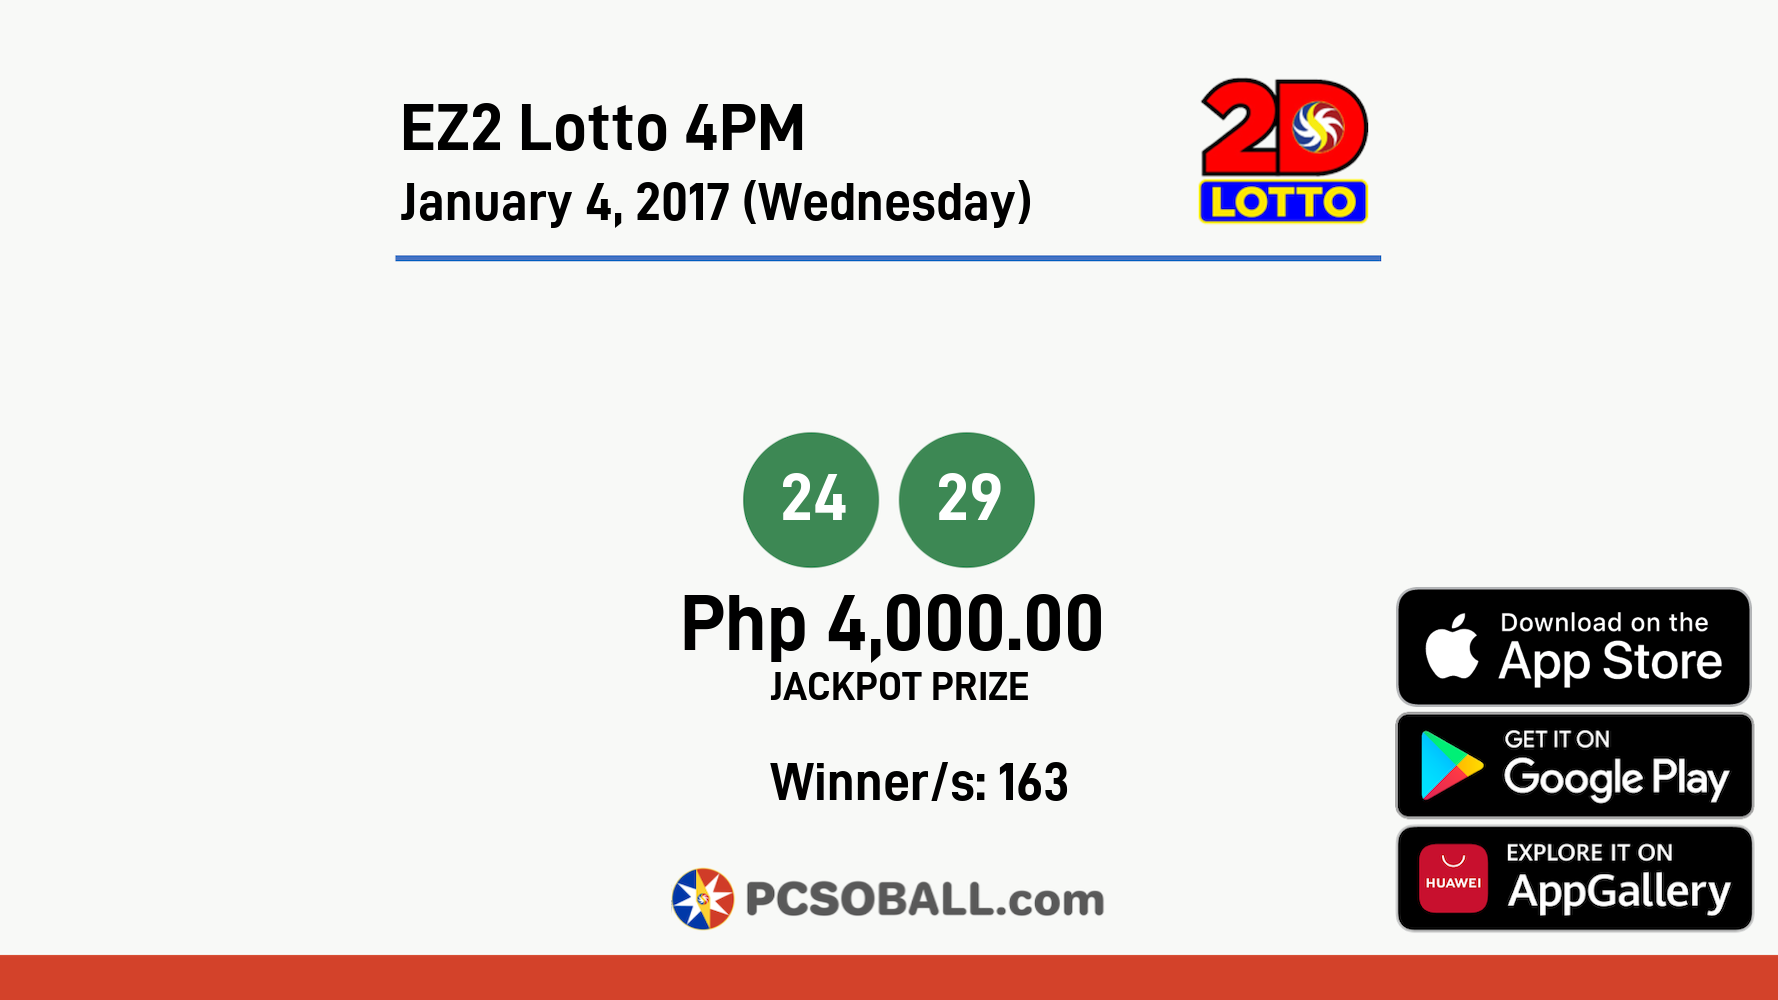 EZ2 Lotto 4PM January 4, 2017 (Wednesday) Result